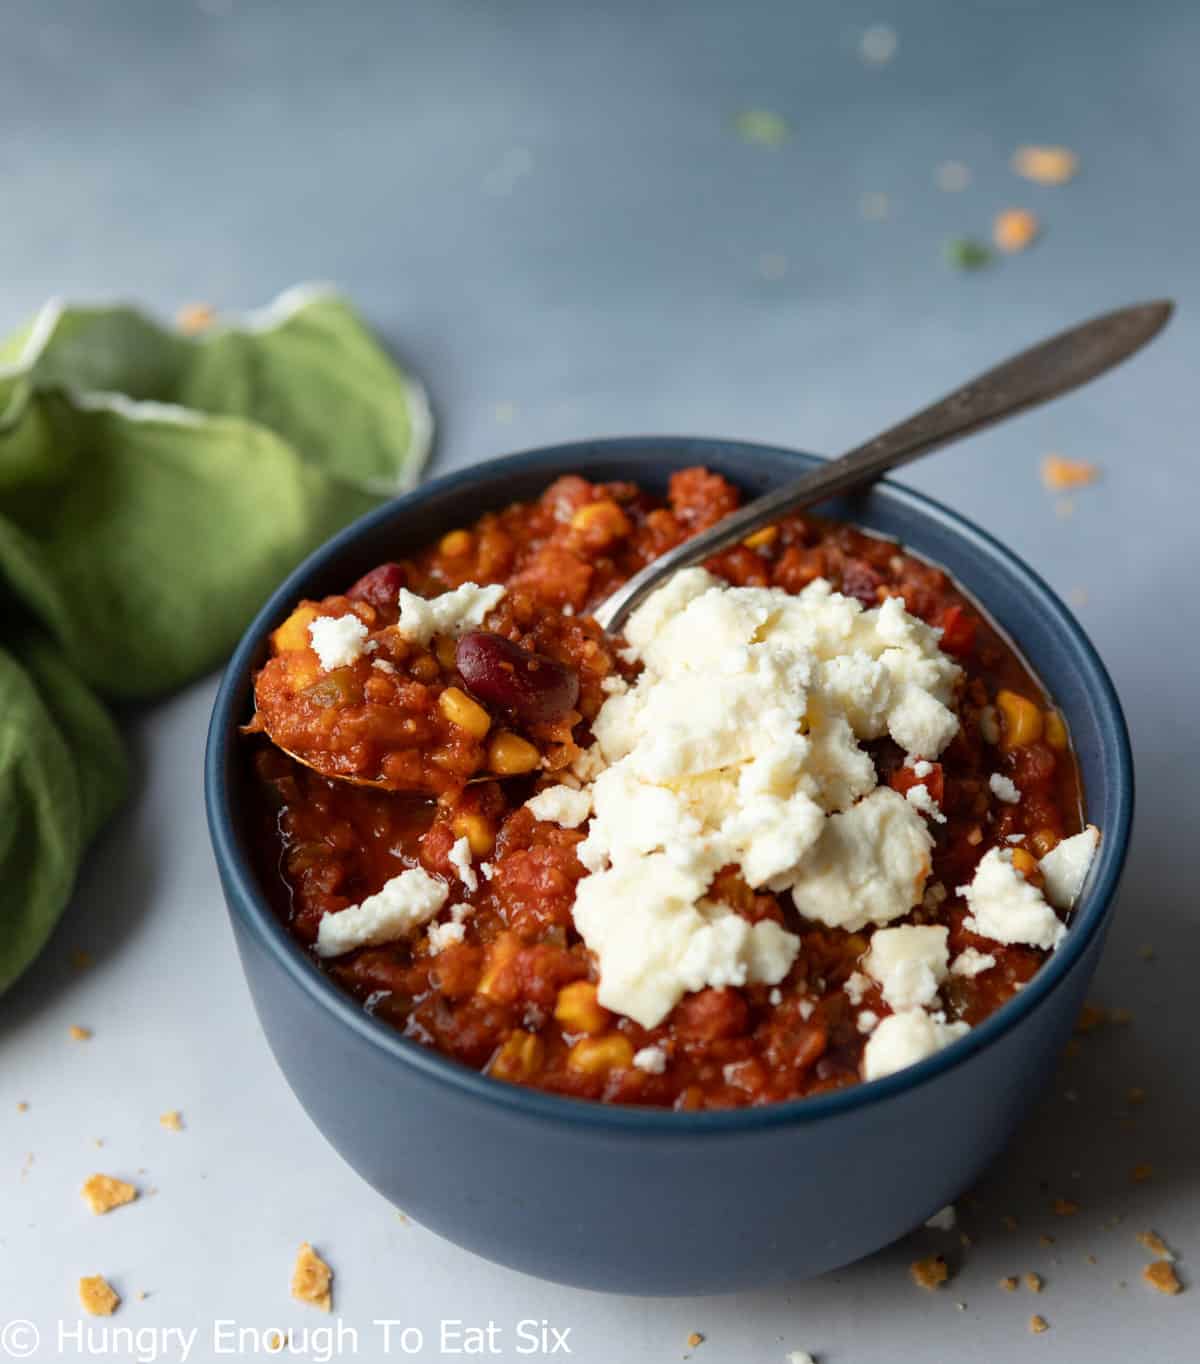 Chili in a bowl with cheese on top.